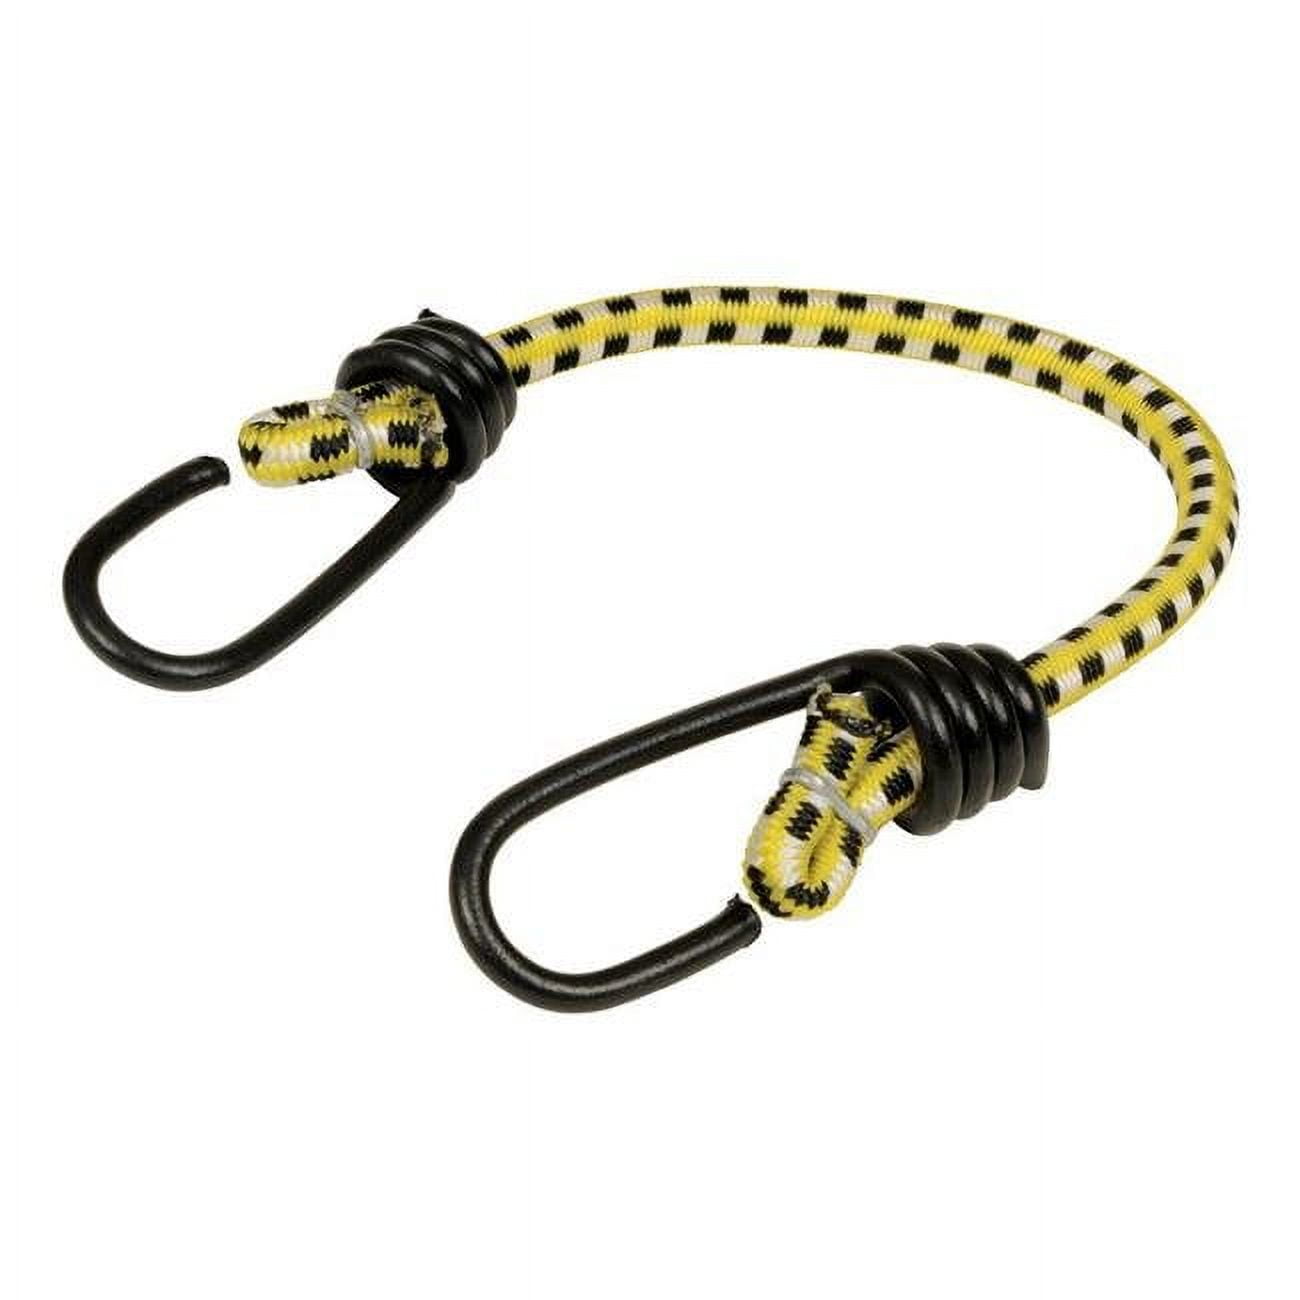 8866295 Yellow Bungee Cord, 13 X 0.315 In. - Case Of 10